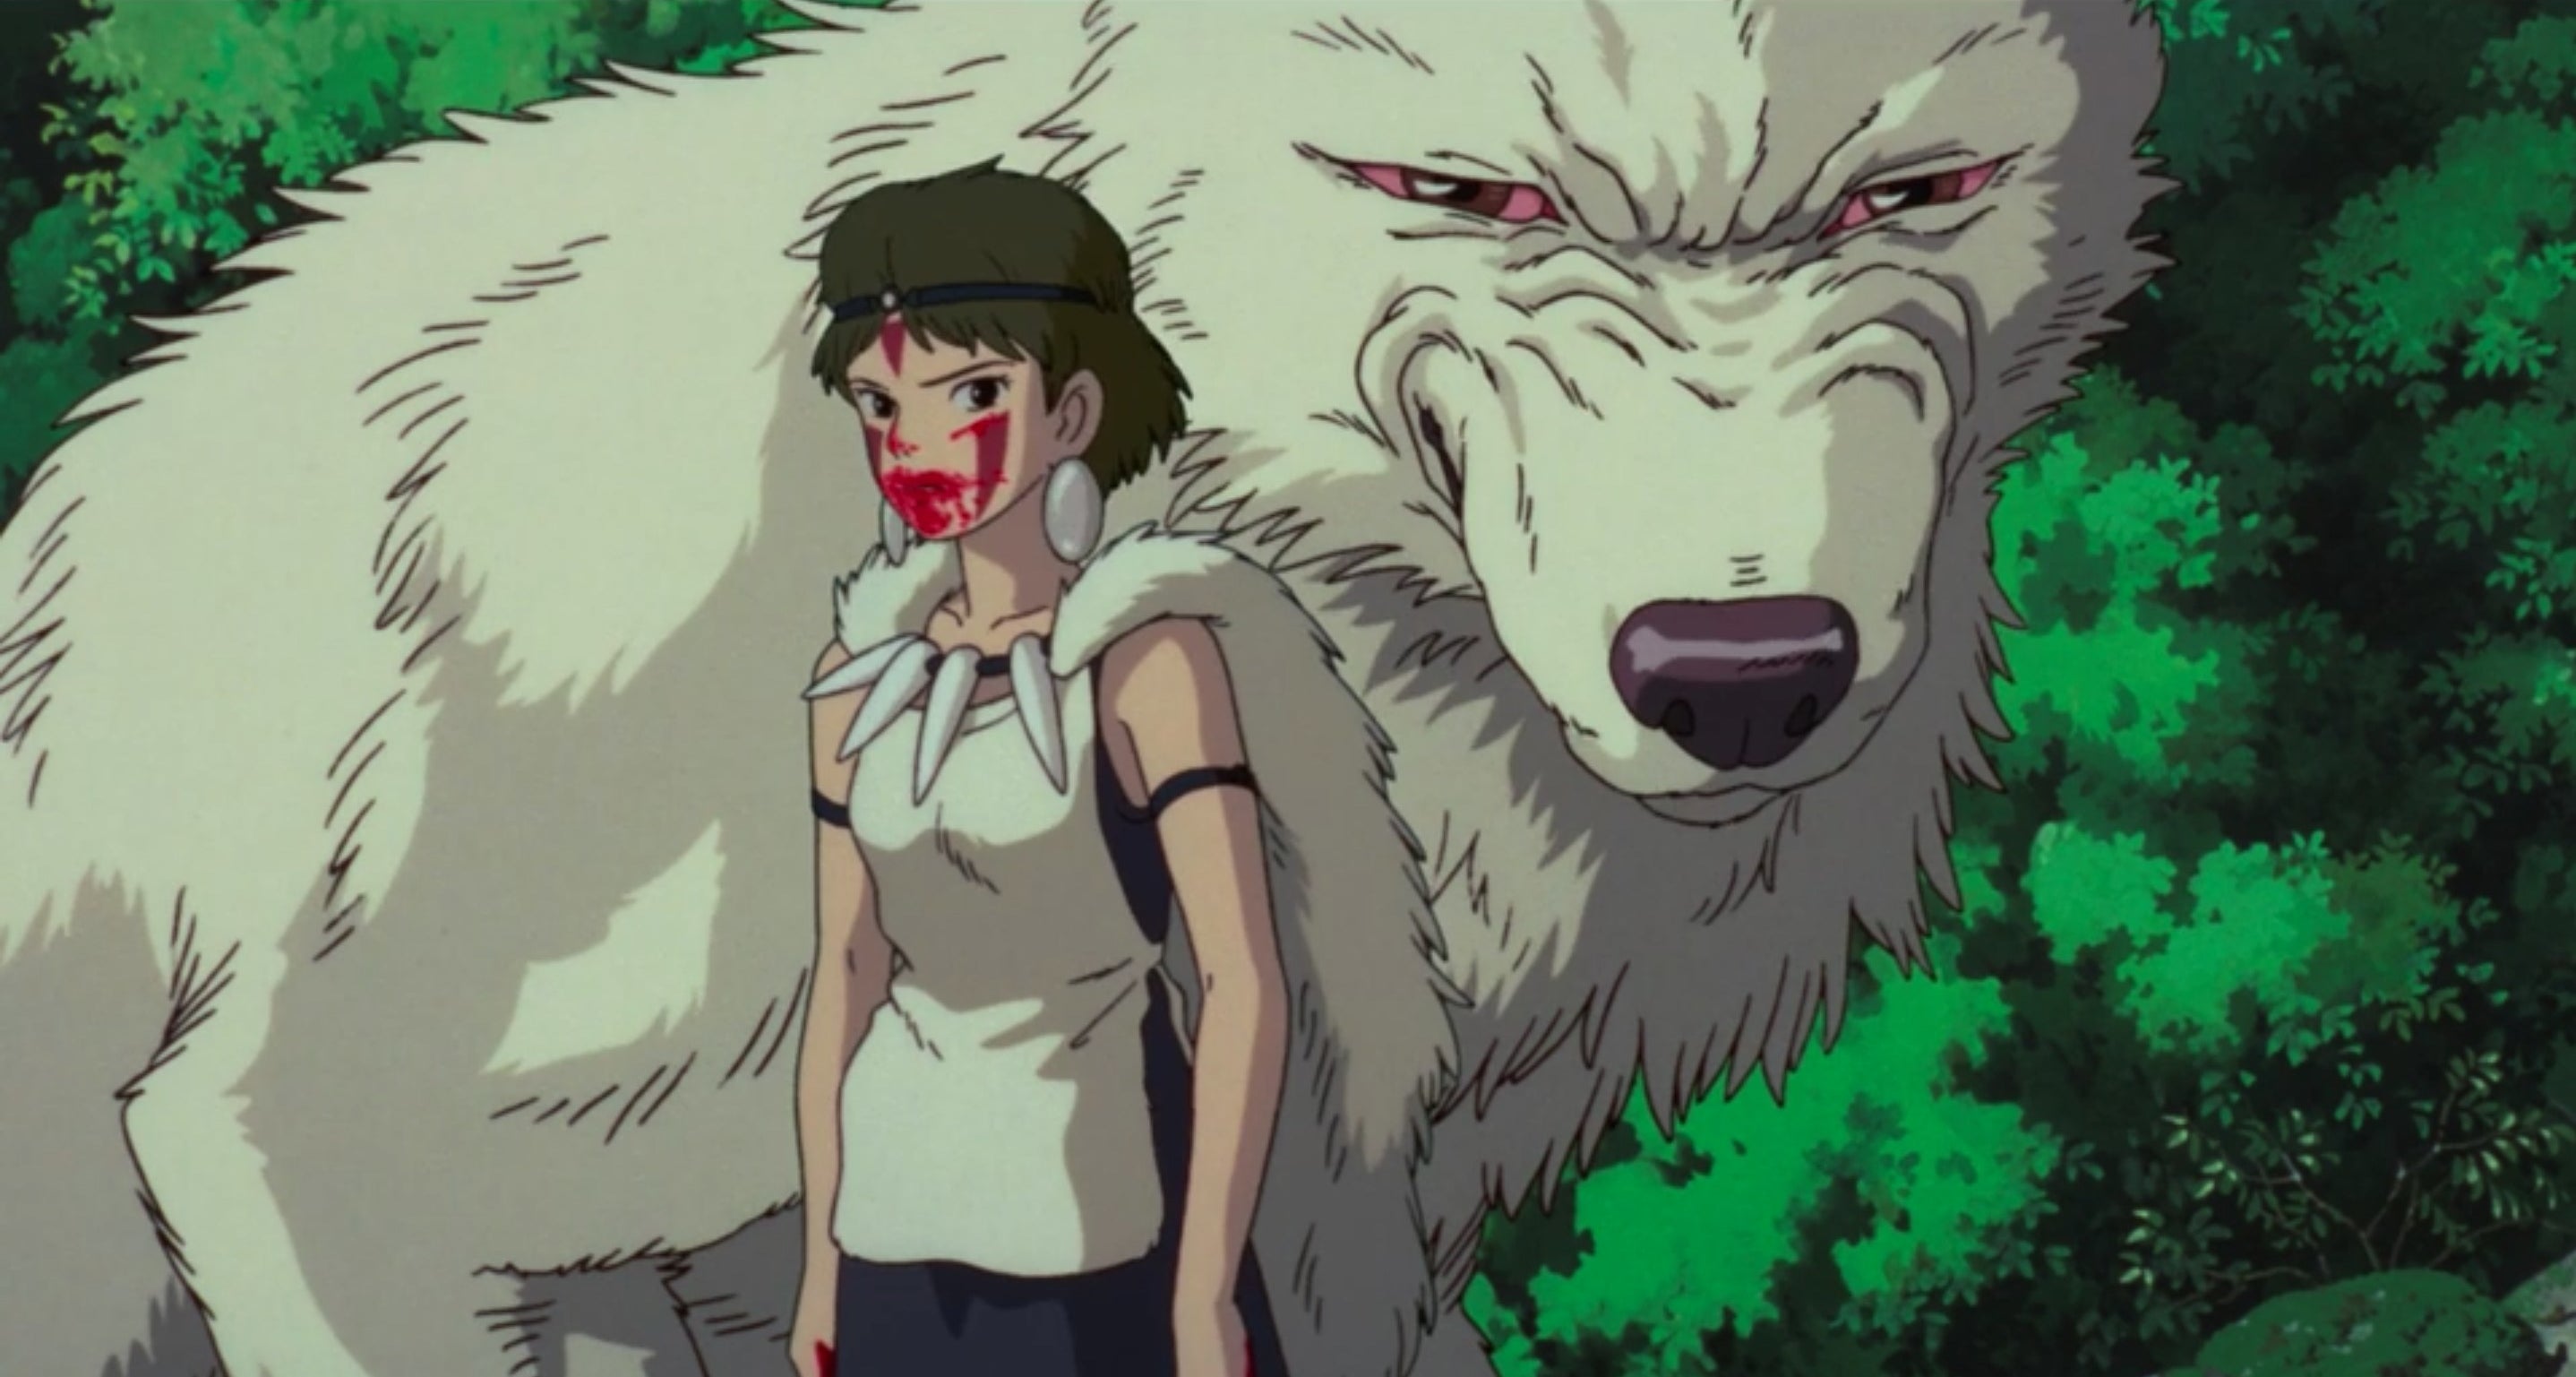 A young girl with a bloody mouth and a large white wolf